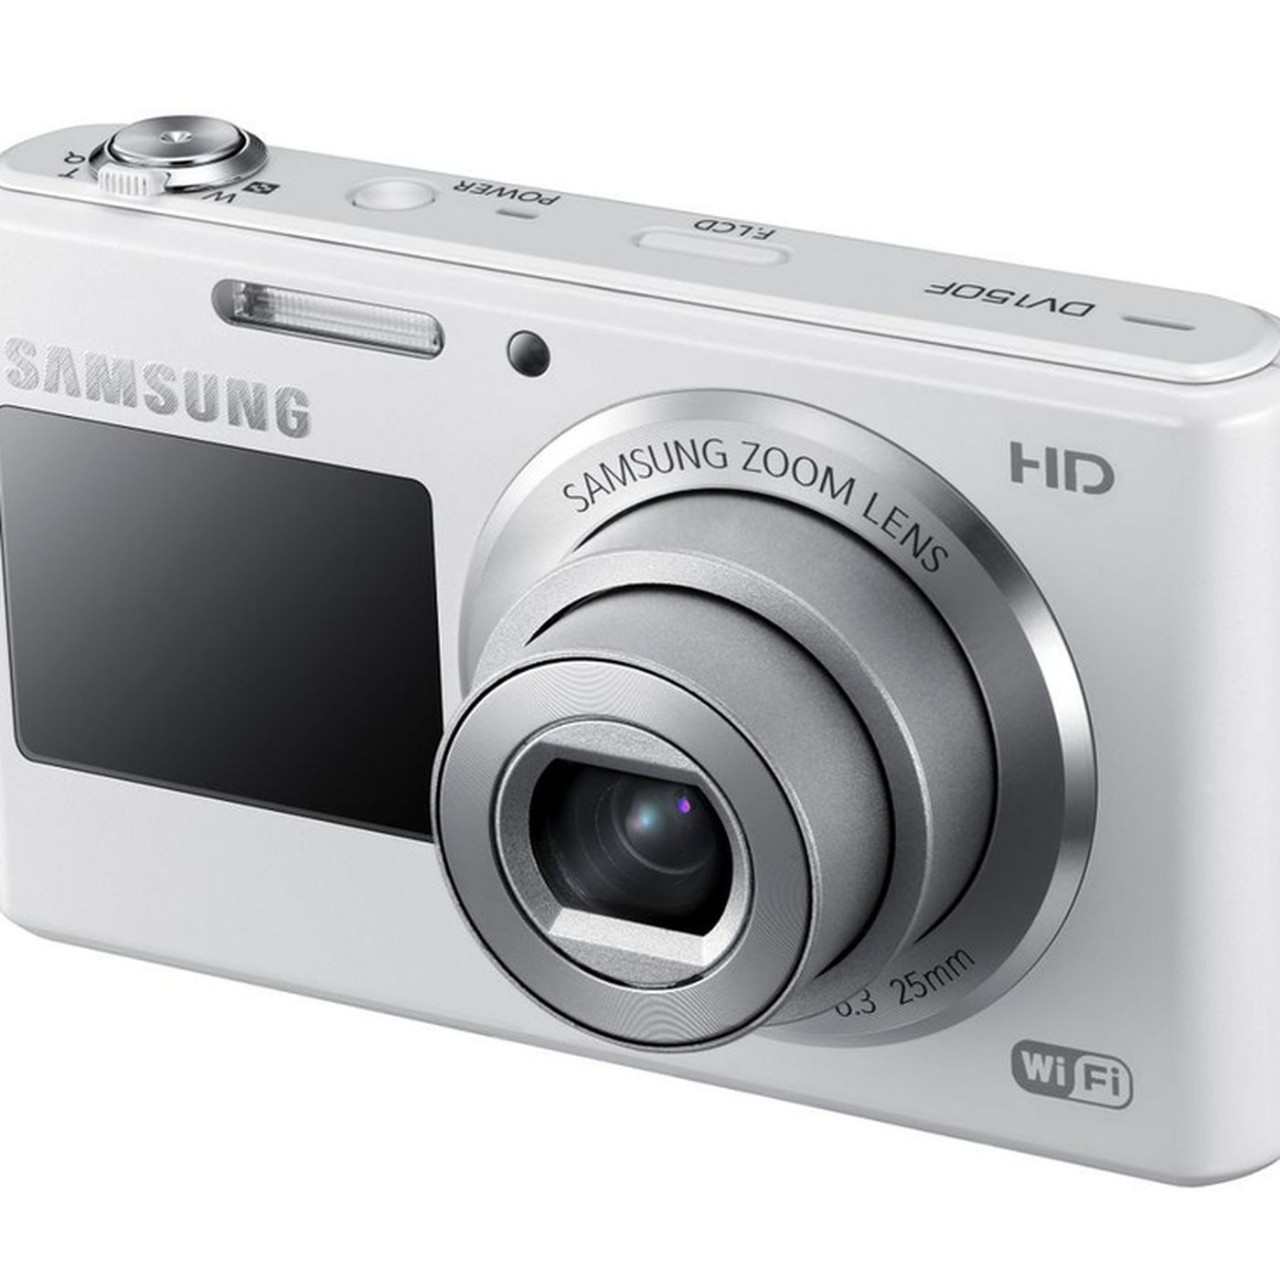 Samsung unveils five new point-and-shoot cameras with Wi-Fi